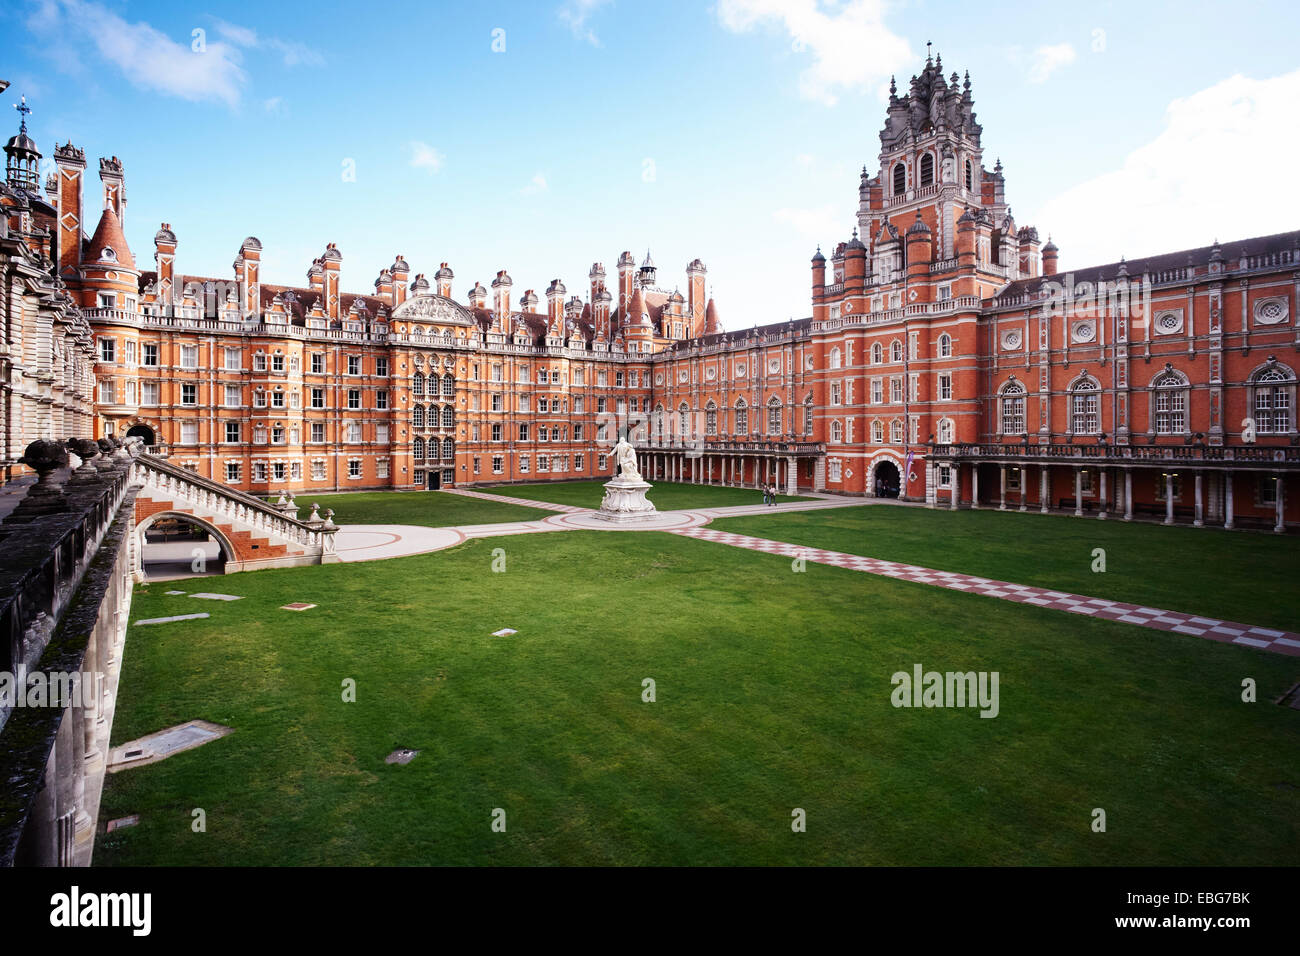 Royal Holloway College, Founder's Building, Egham, United Kingdom ... - Royal Holloway College FounDers BuilDing Egham UniteD KingDom Architect EBG7BK